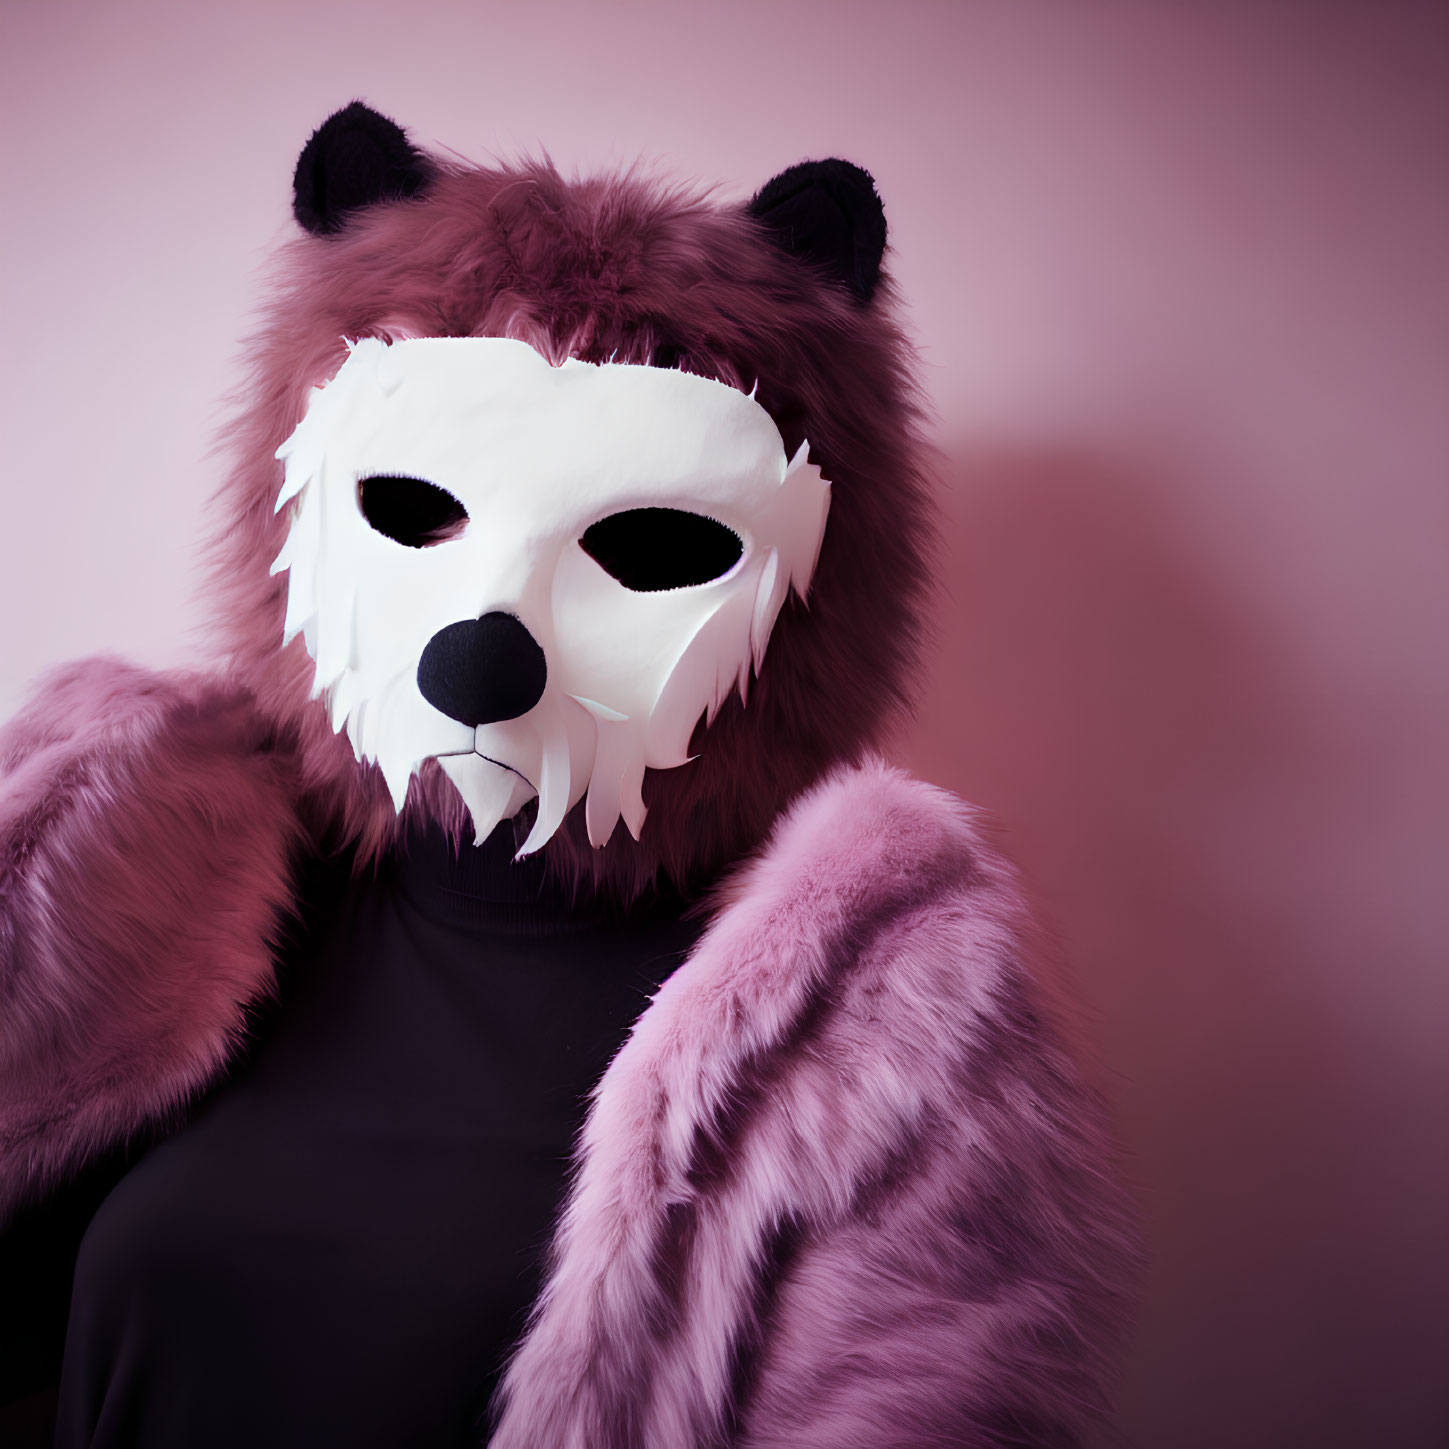 Furry costume with bear mask on pink background